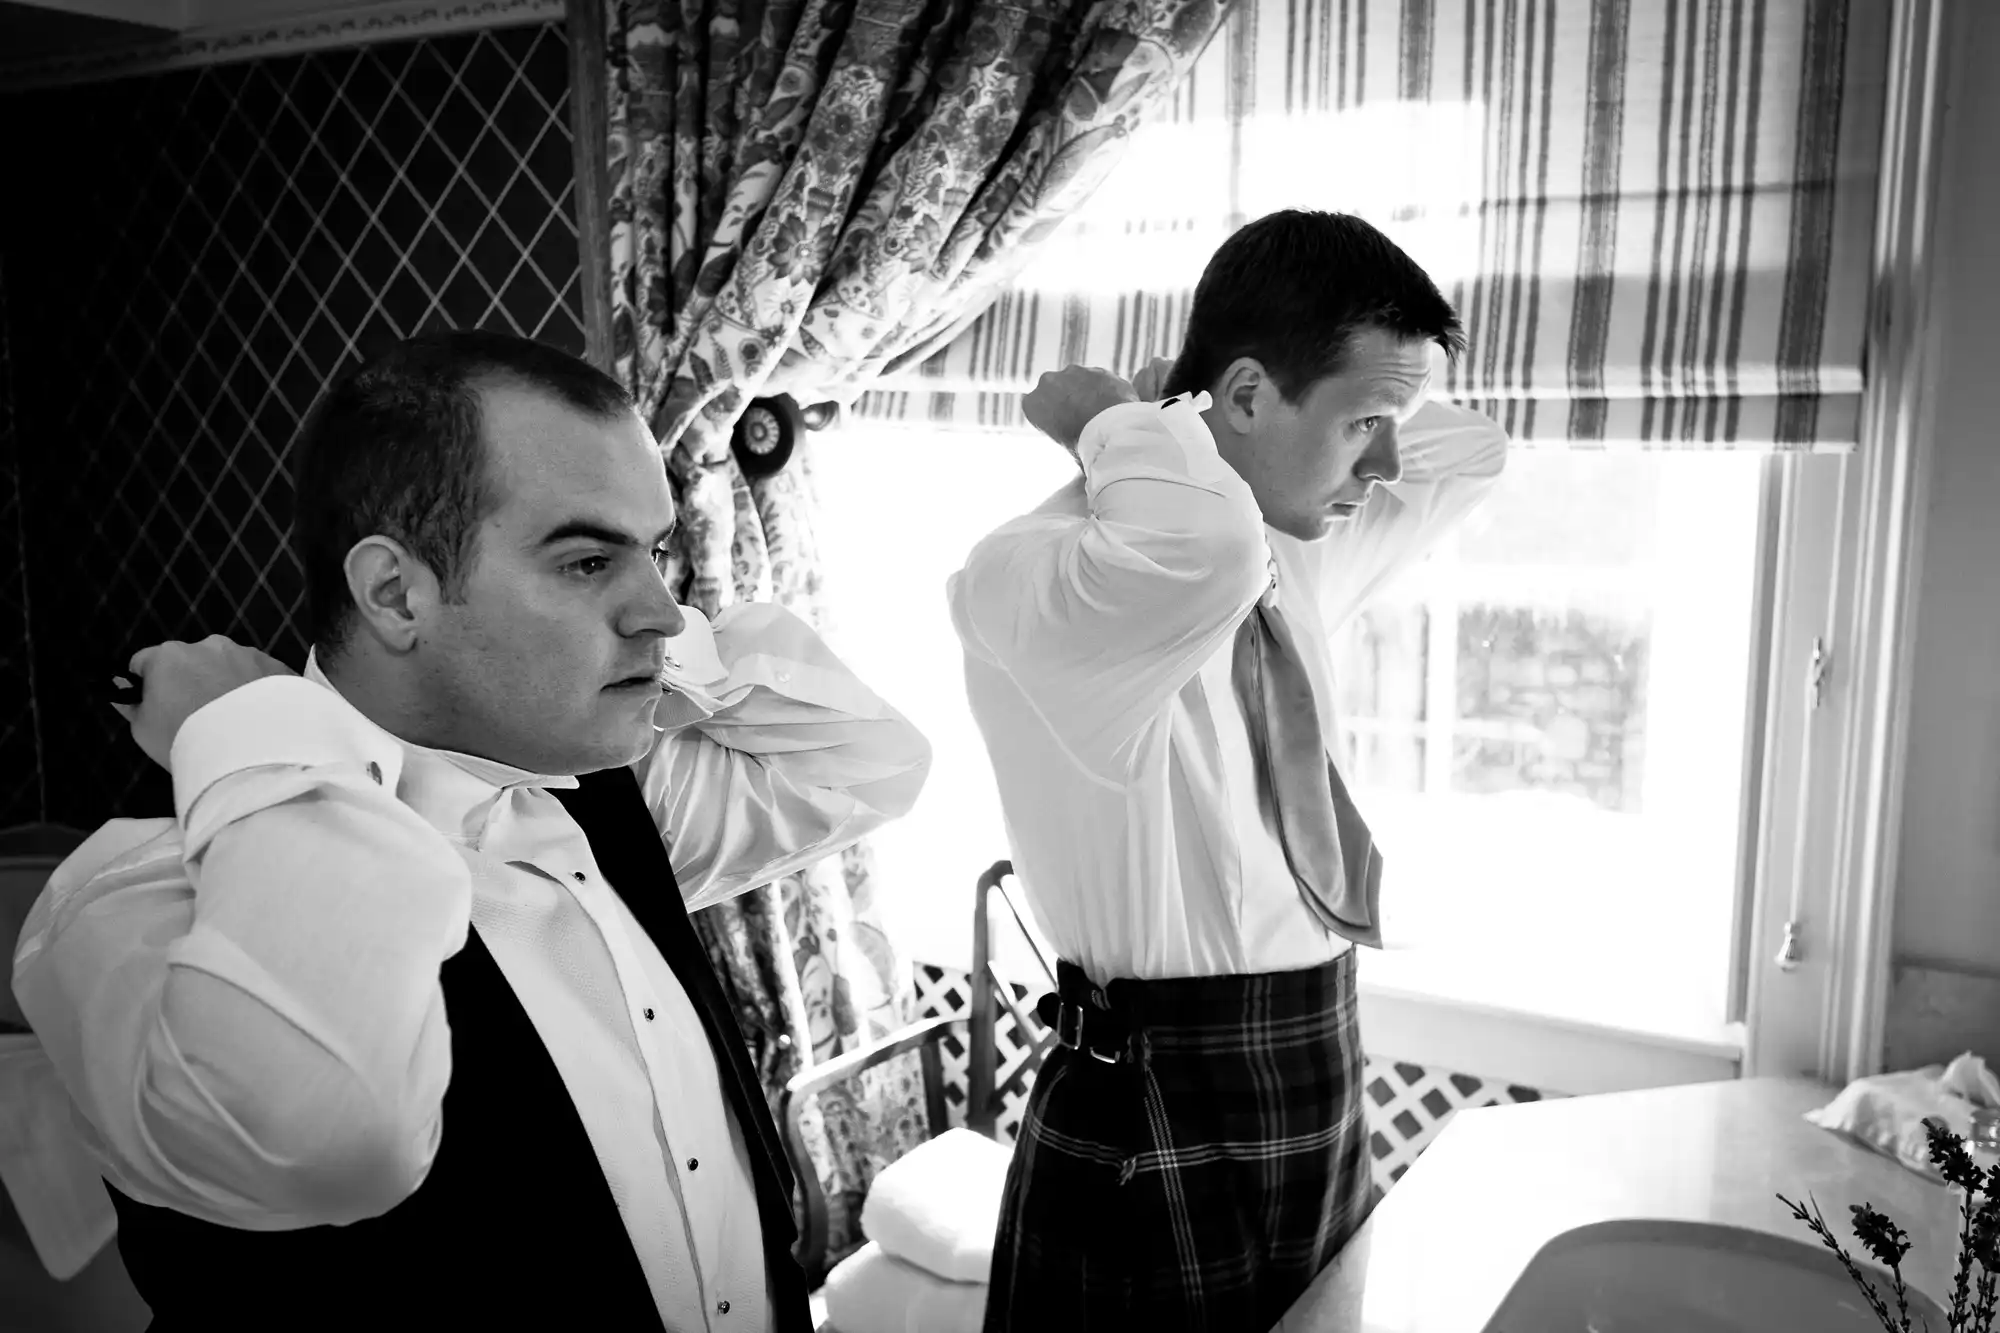 Two men in formal attire adjusting their bow ties in a room with floral curtains, one wearing a kilt.